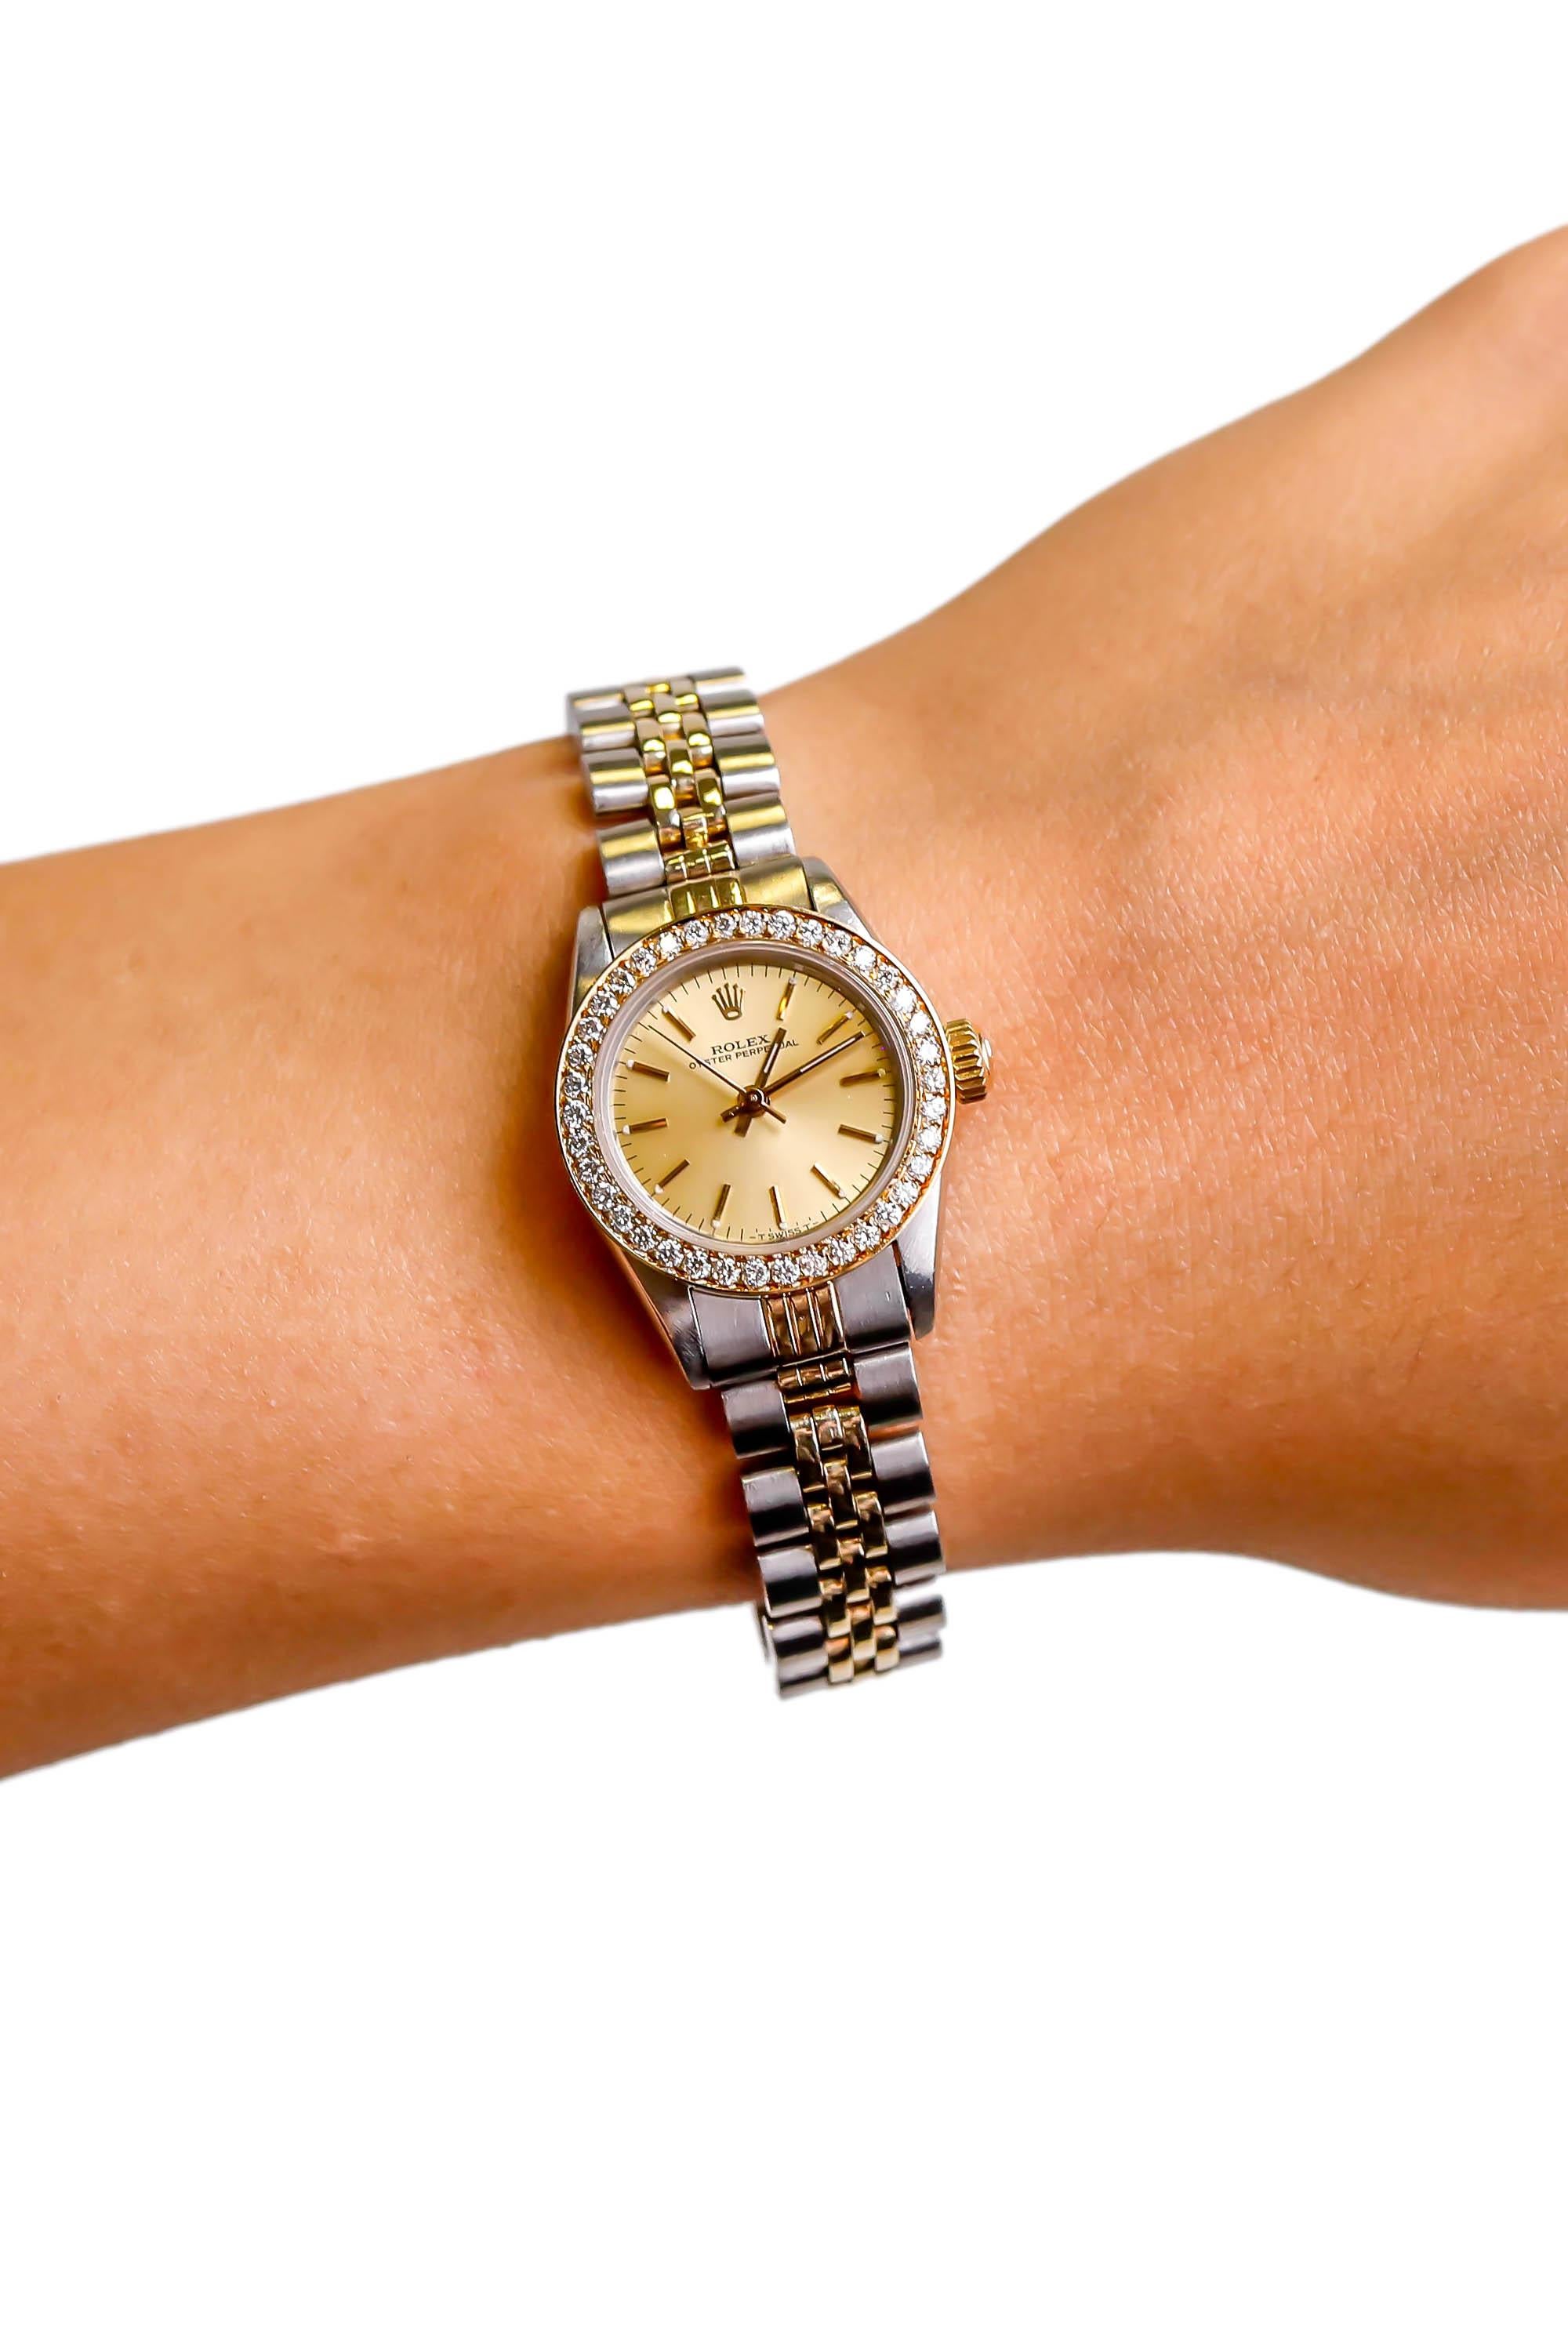 Brand: Rolex 
Movement: NA
Case Diameter:  NA
Dial: Factory Set Diamonds In 18K Yellow Gold Setting 
Case Set With Diamonds 
Bracelet: Semi-Circular Three-Piece Links 
Wrist Size: 6.75 Inches 
Condition: Excellent

Keywords: Rolex Watch, Rolex